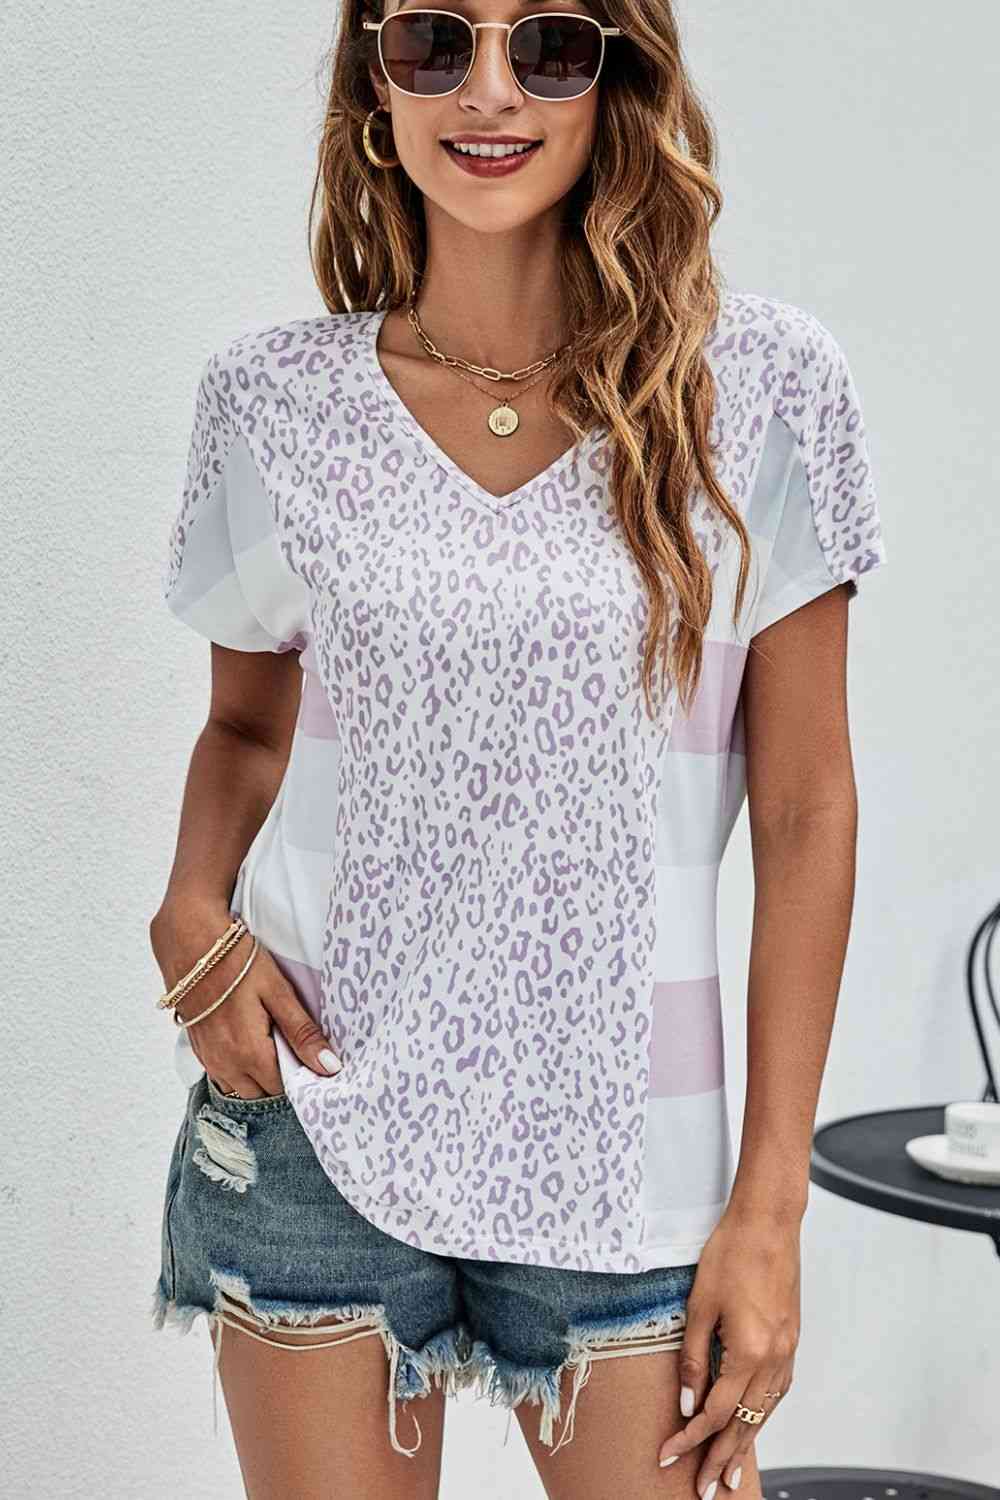 Leopard Striped V-Neck Tee Shirt - Shop Tophatter Deals, Electronics, Fashion, Jewelry, Health, Beauty, Home Decor, Free Shipping